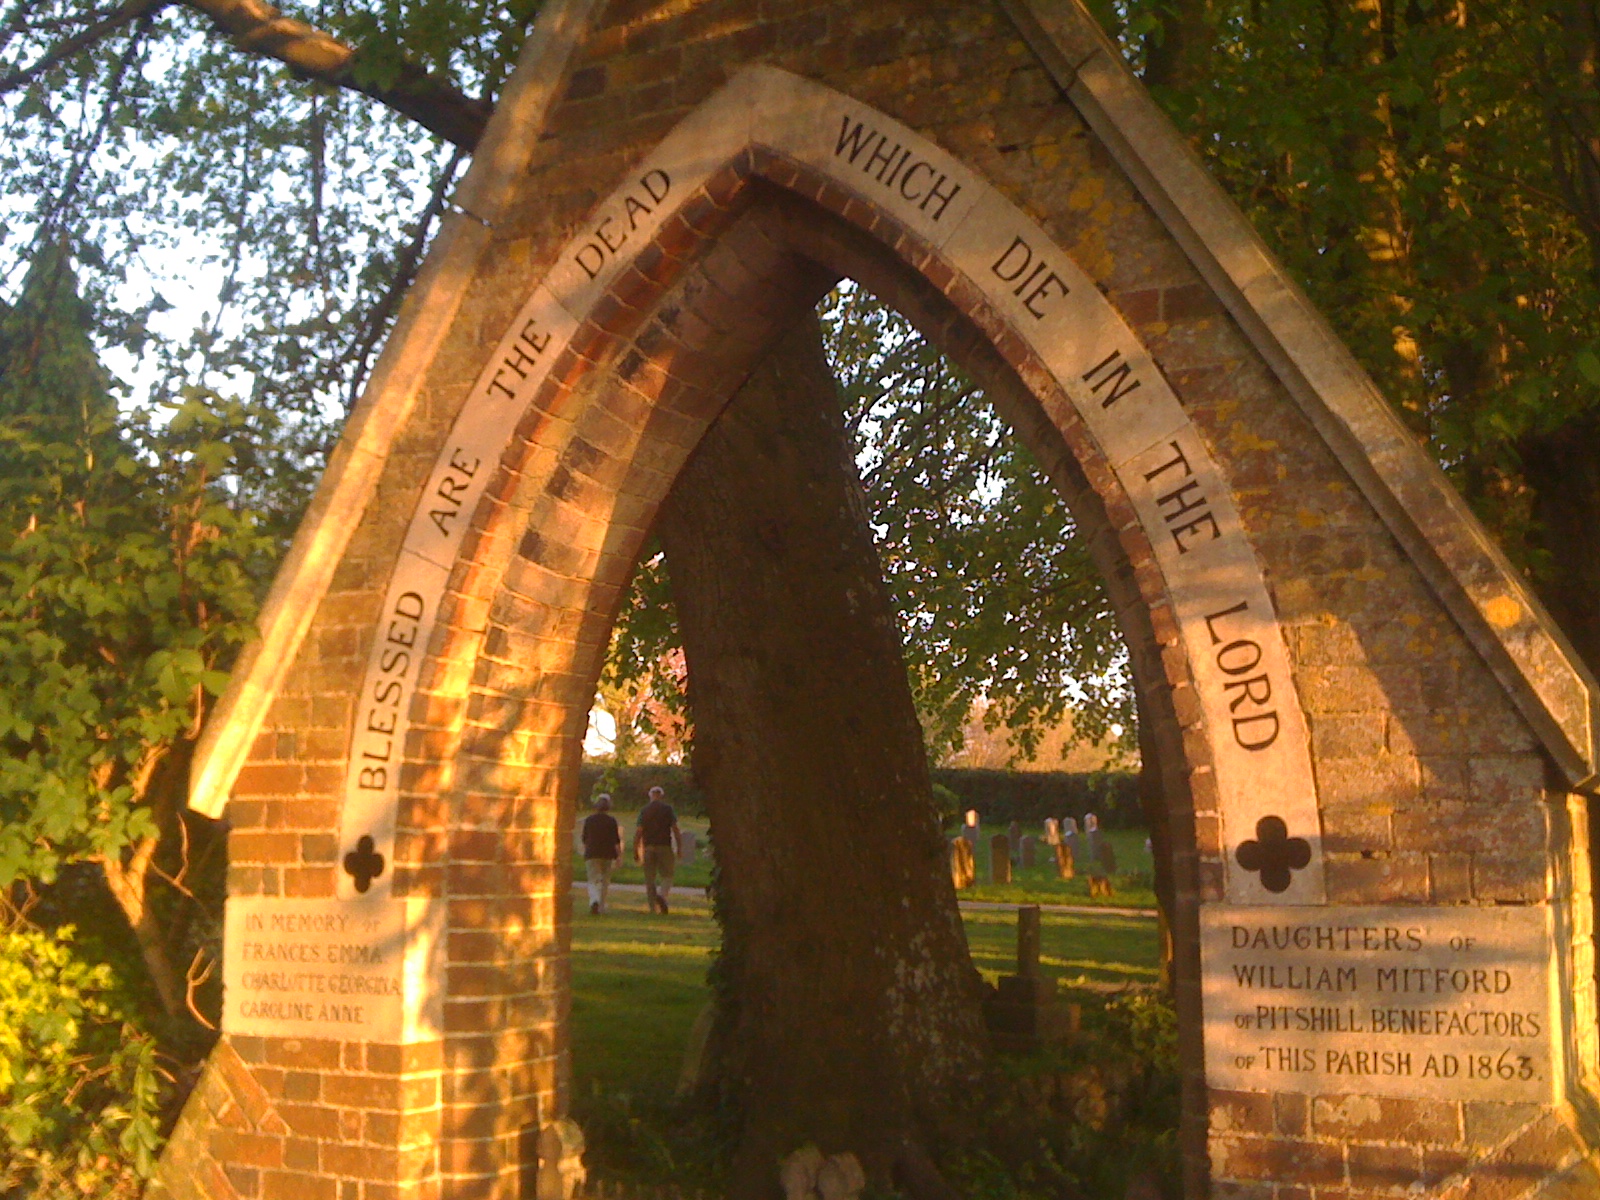 Restored stone archway with hand painted lettering